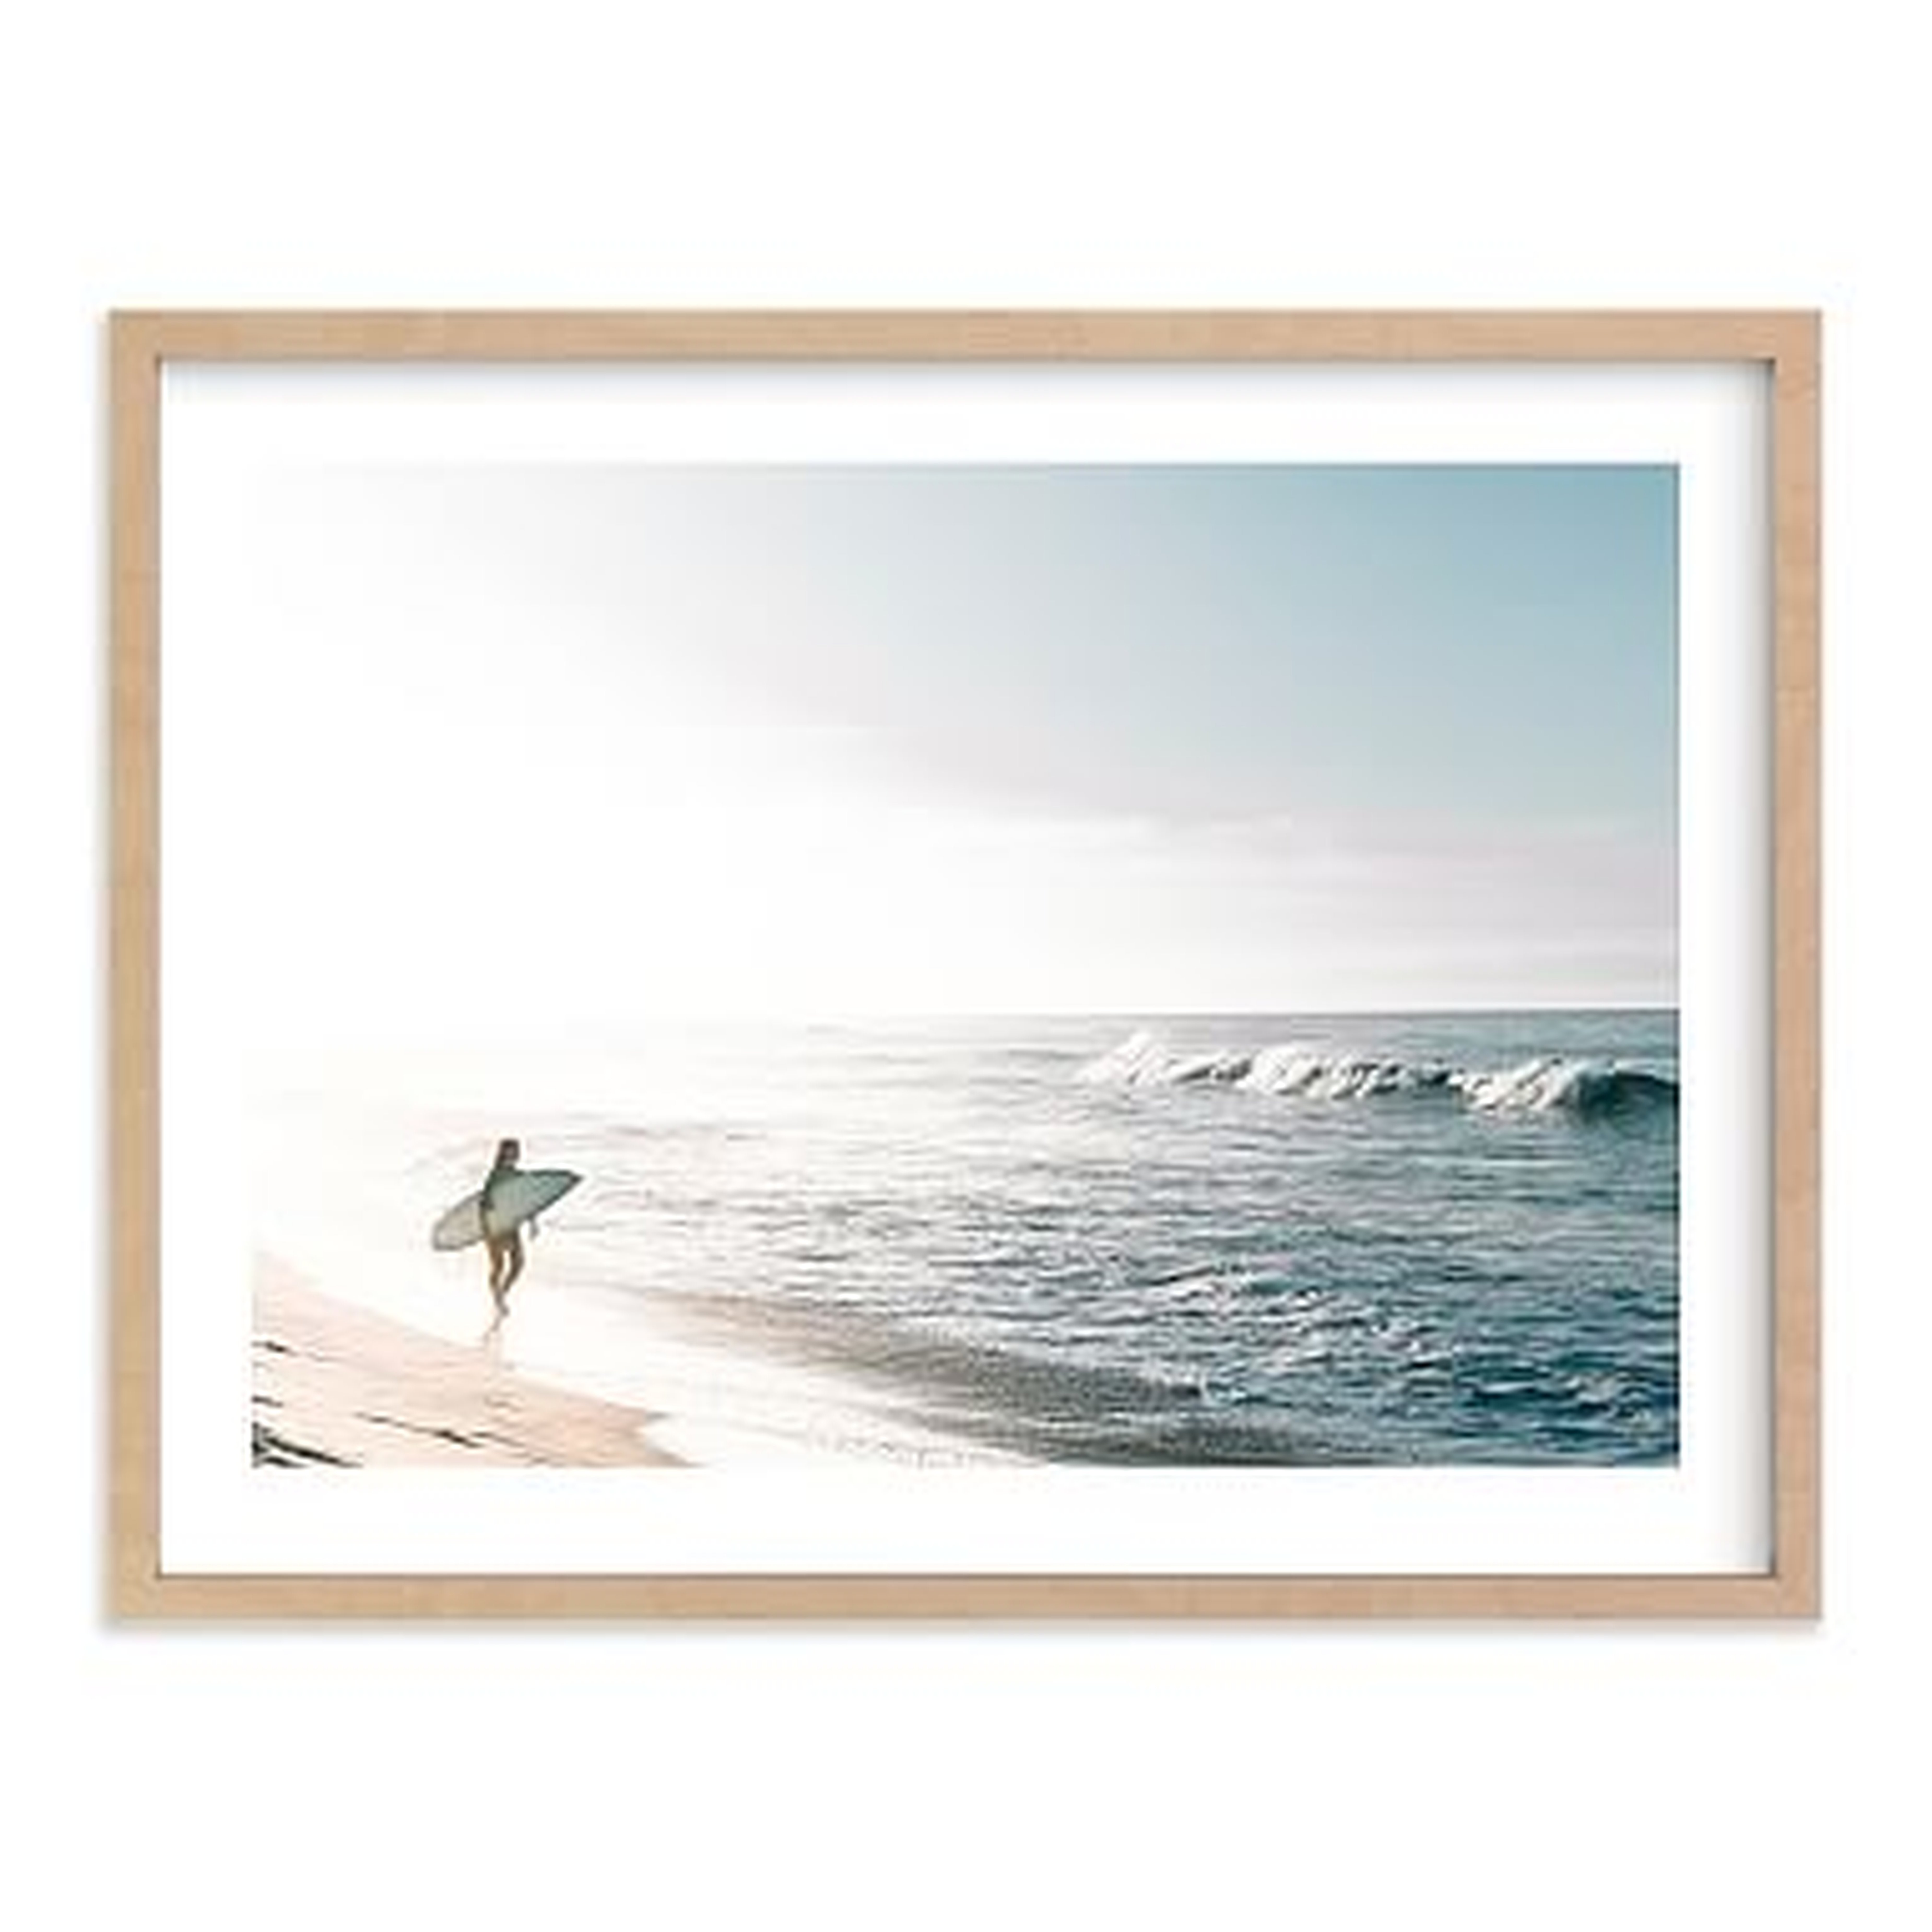 Surfer Girl Wall Art by Minted(R), 18 x 24, Natural - Pottery Barn Teen